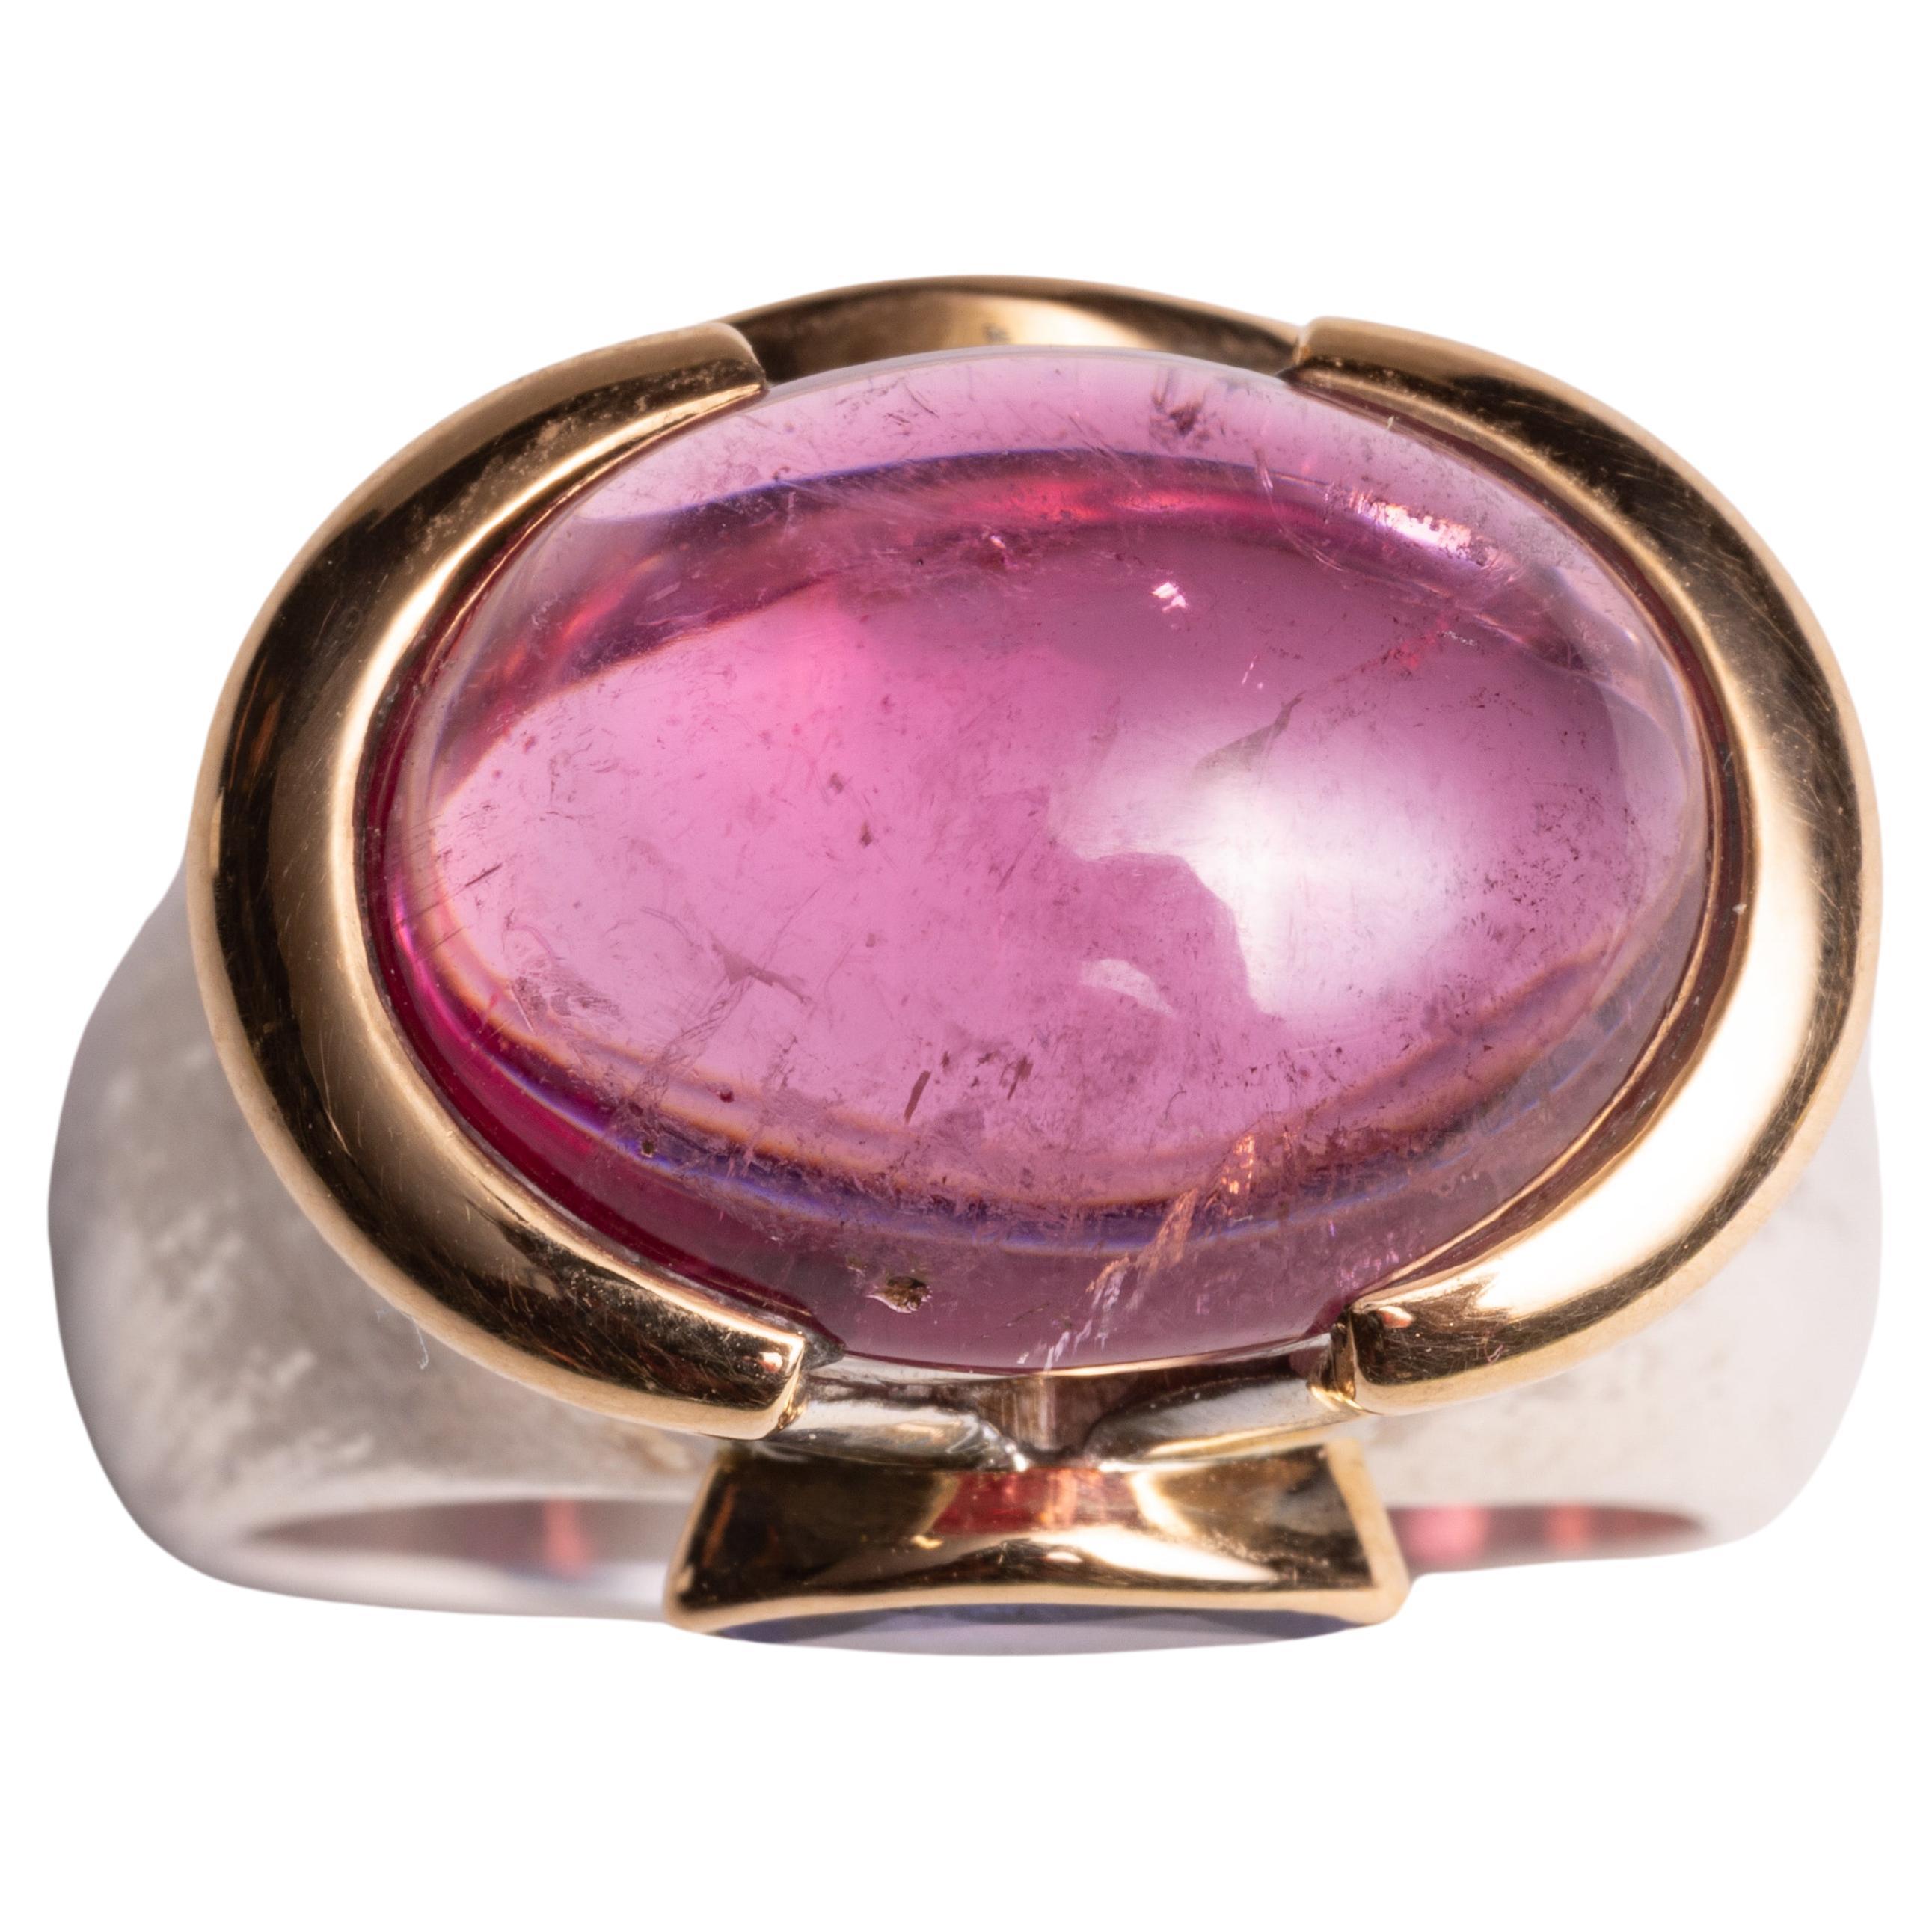 A spectacular large pink tourmaline cabochon dome ring set in 18K gold.  It is flanked by two marquise cut tanzanite stones also set in 18K gold.  The band itself is sterling silver.  Ring size is 7.25.

The fine jewelry collection is sourced,